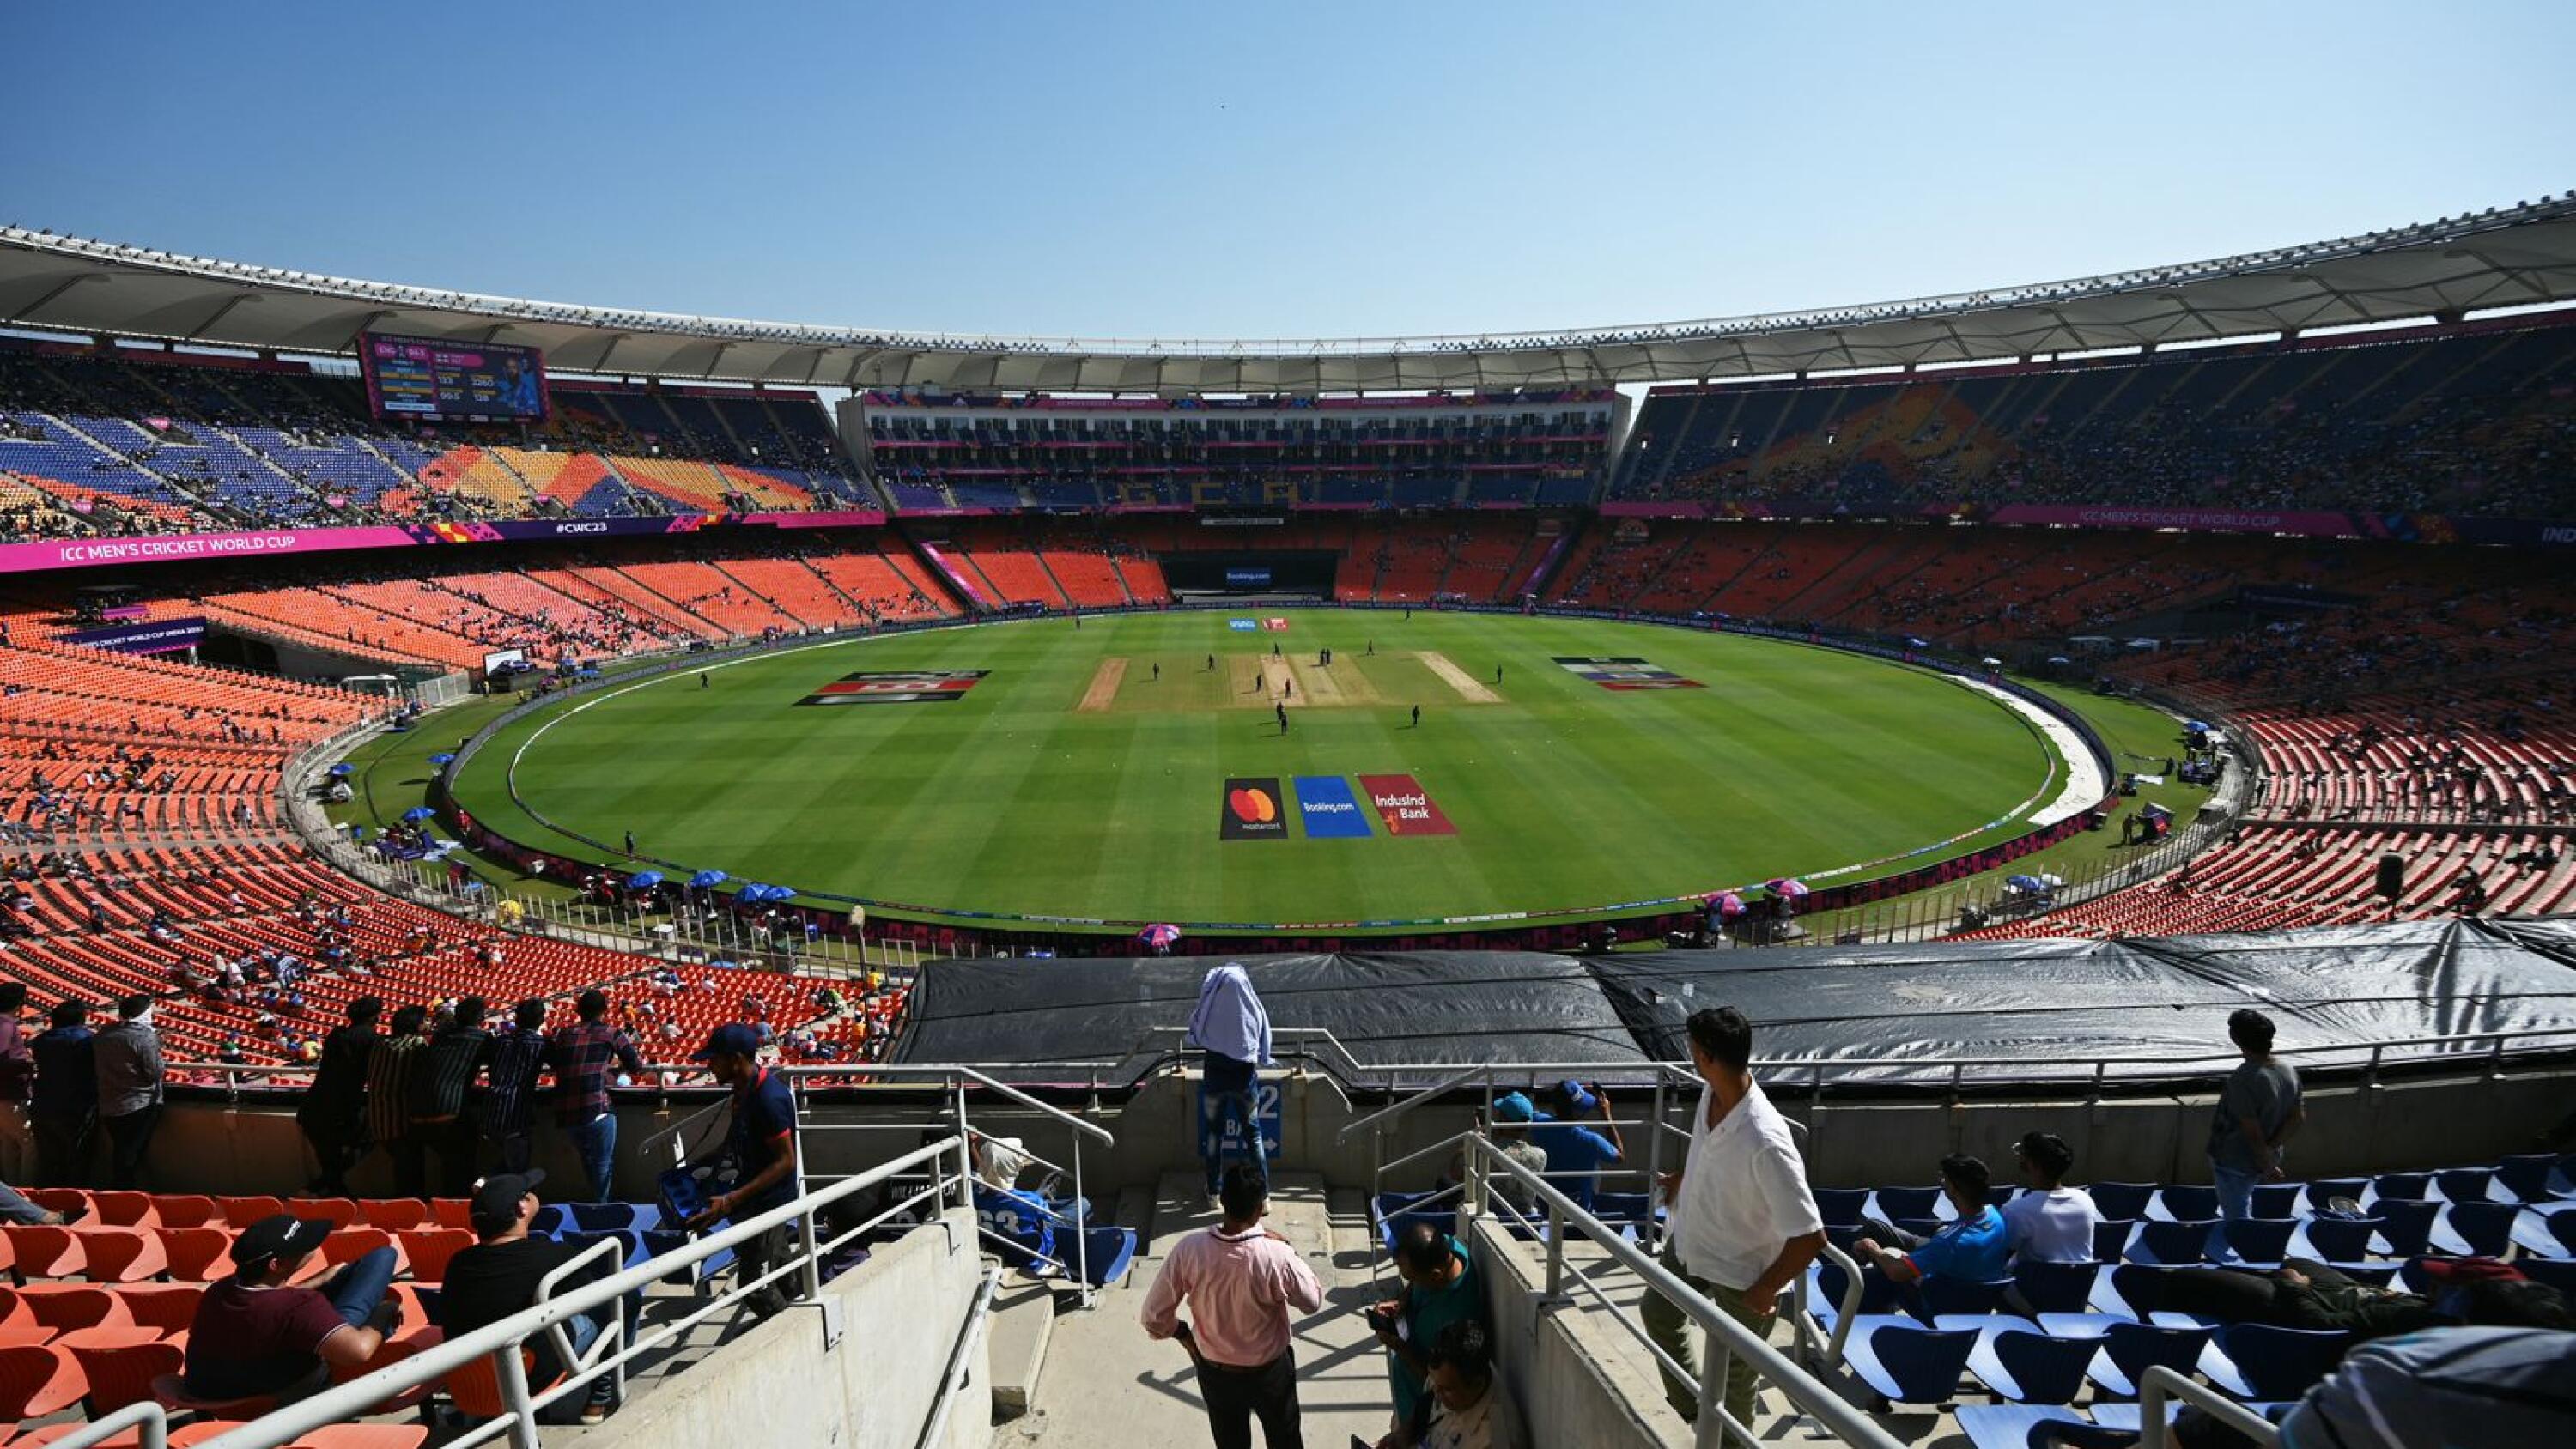 This picture shows a general view of the Narendra Modi Stadium during the Cricket World Cup match between New Zealand and England